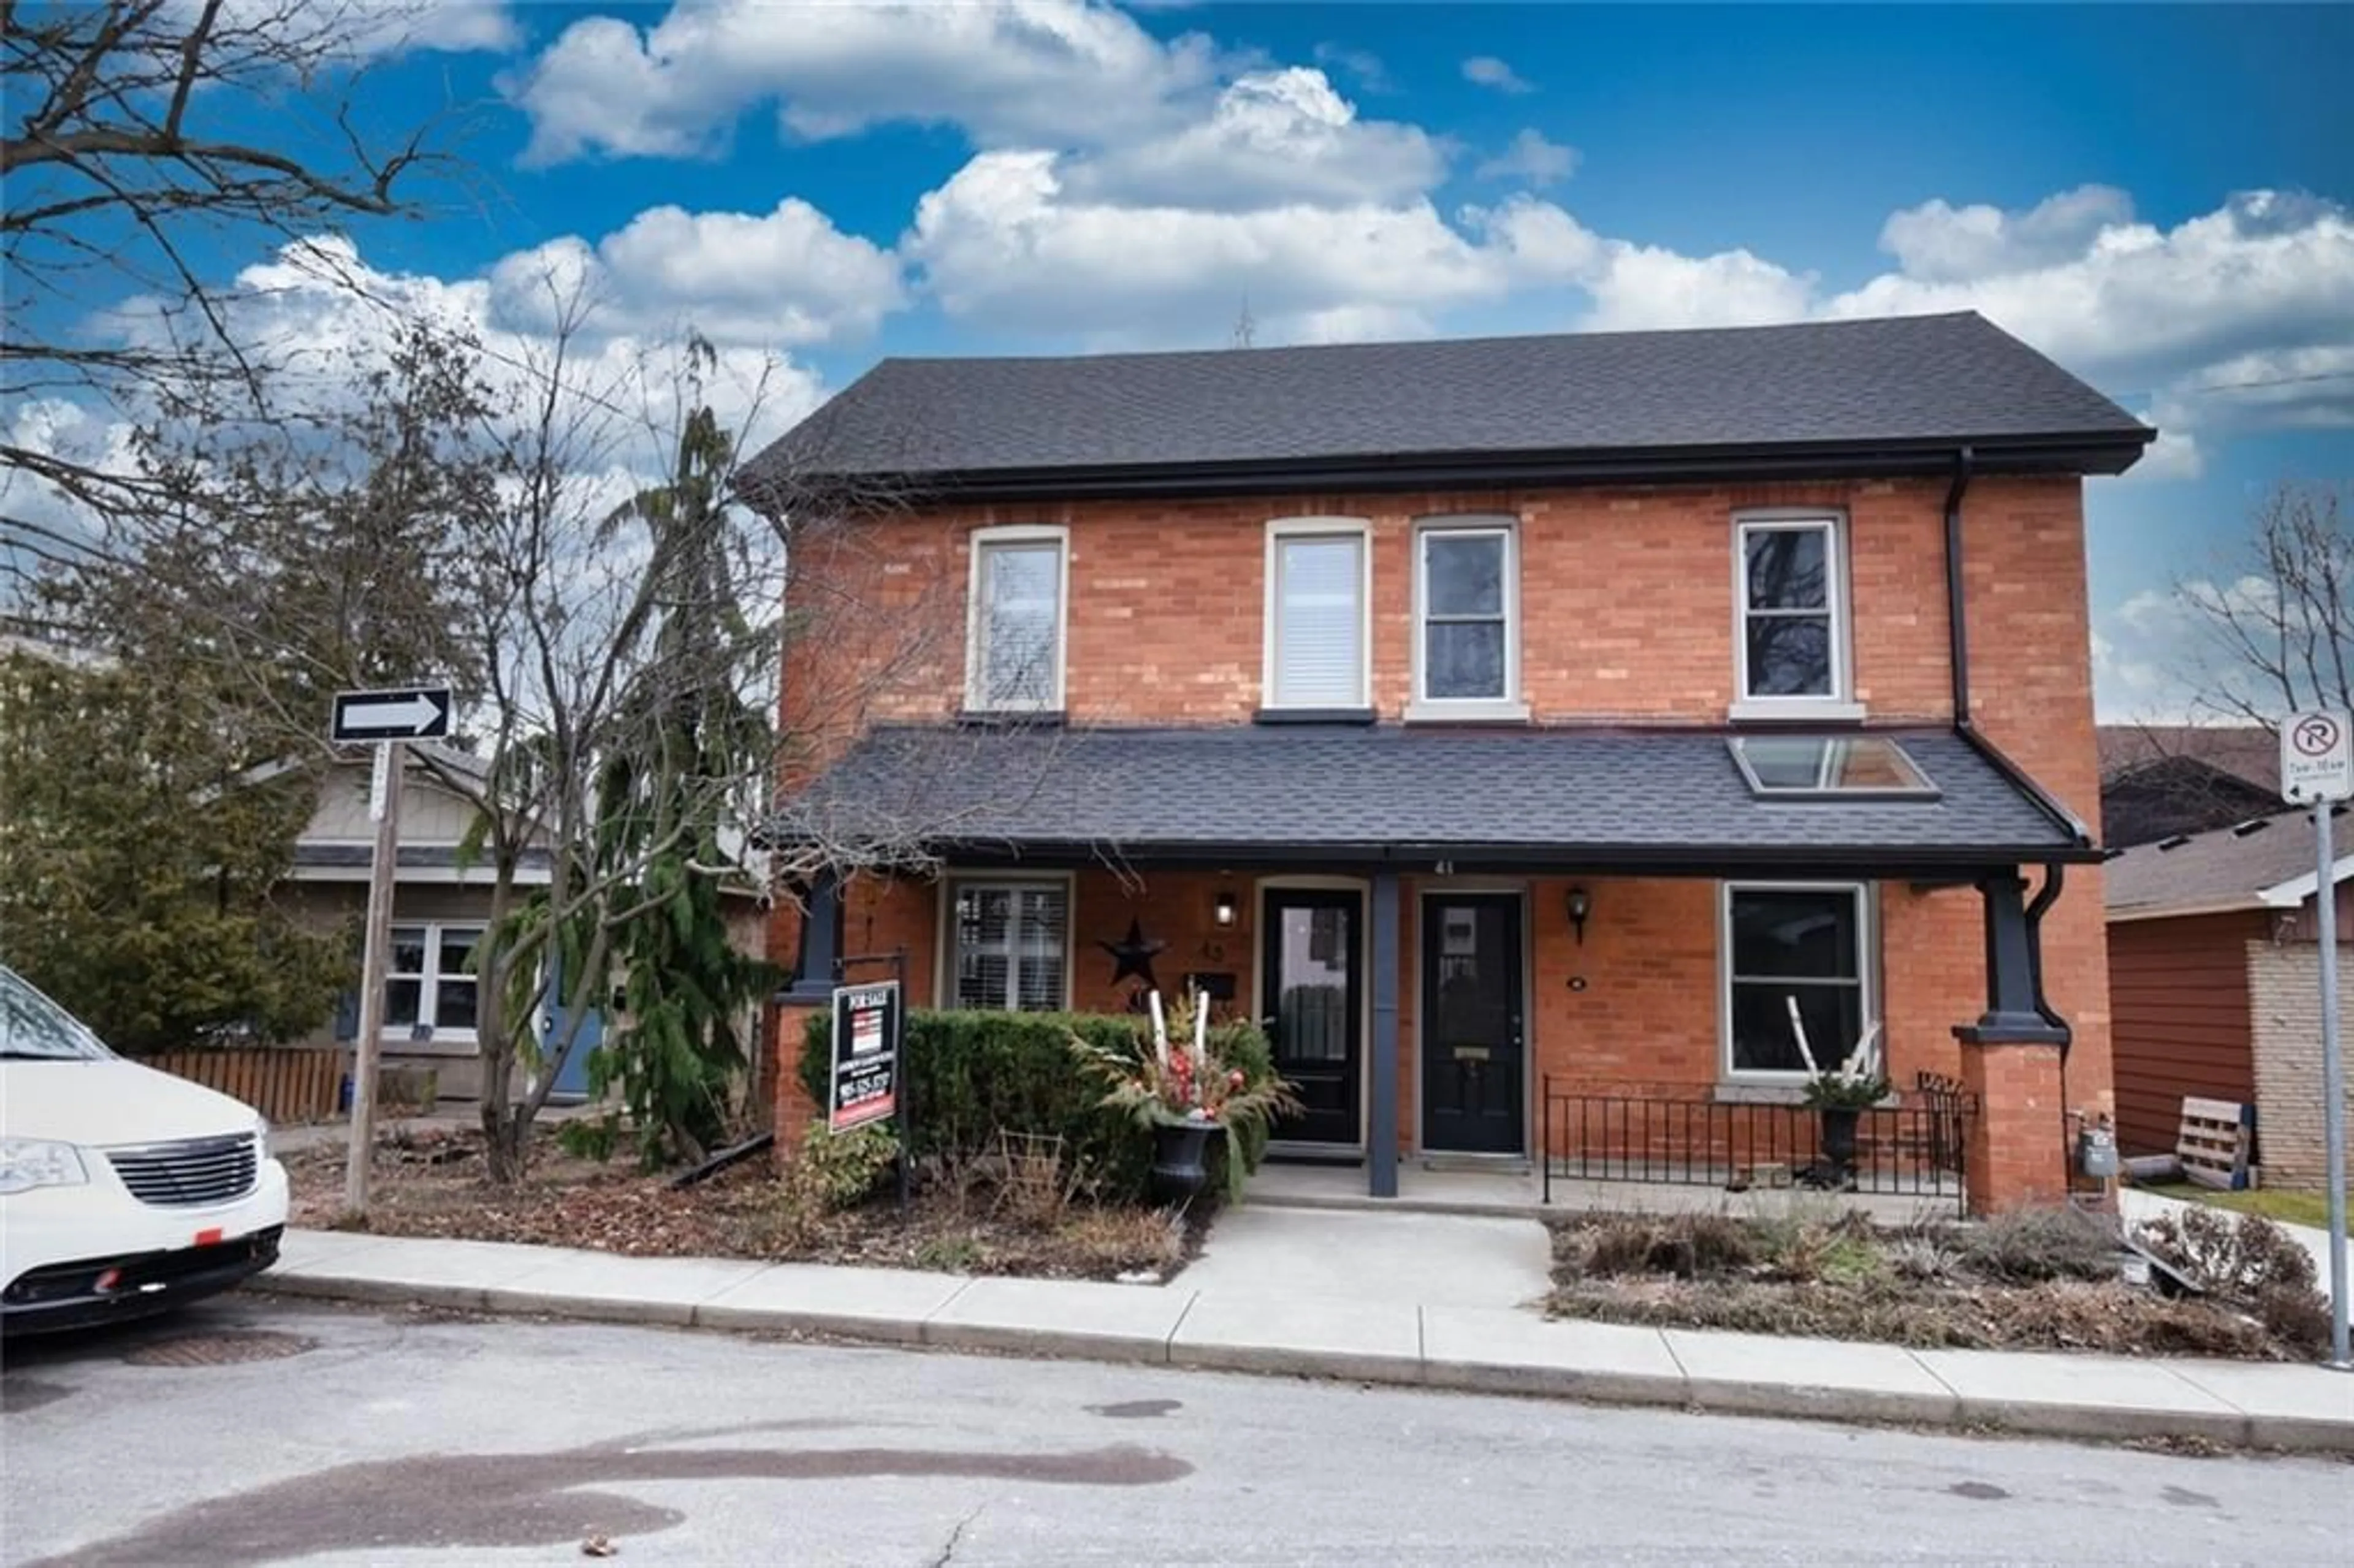 Home with brick exterior material for 43 MARKET St, Dundas Ontario L9H 2Y6